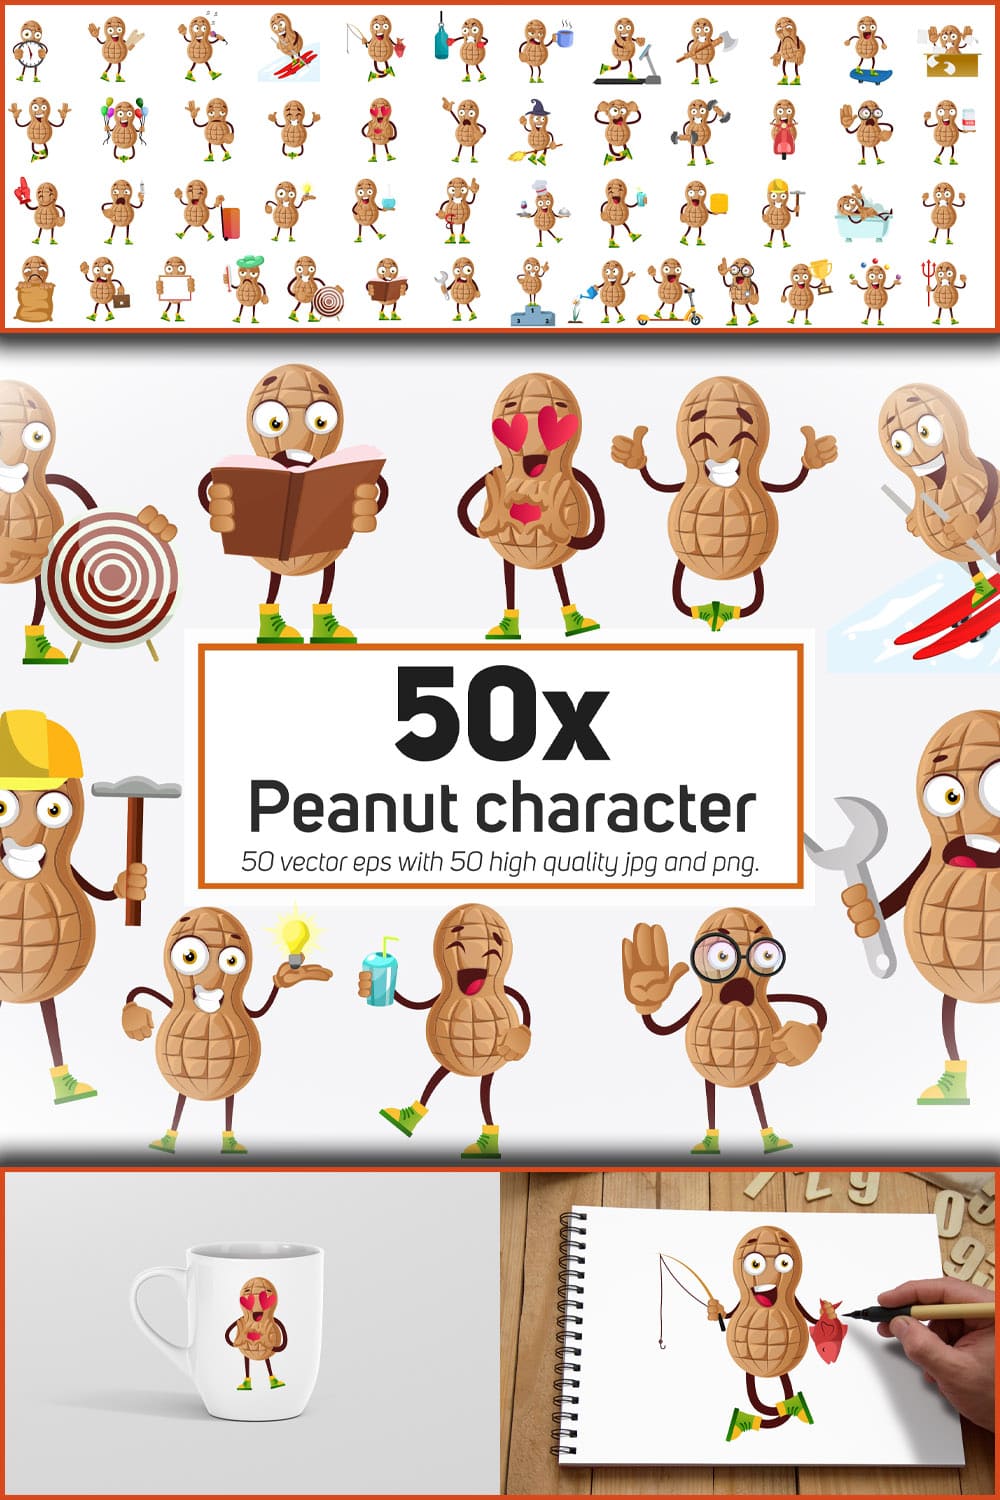 Peanut character or mascot in different situations of pinterest.